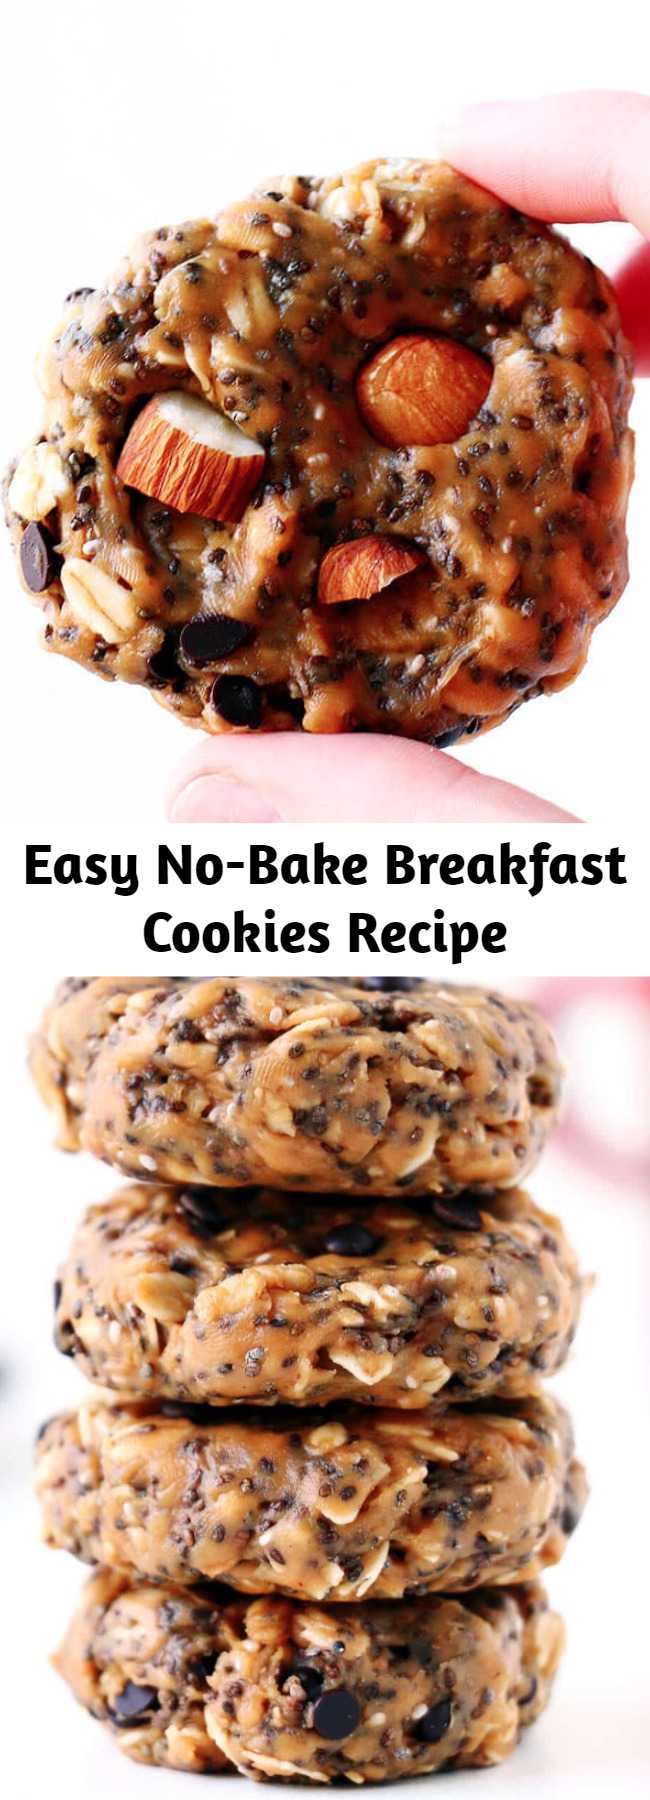 Easy No-Bake Breakfast Cookies Recipe - These No-Bake Breakfast Cookies are easy to make, healthy, packed with protein and simply delicious. They can be whipped up in less than 5 minutes and stored for up to two weeks. #breakfast #breakfastrecipes #breakfastideas #breakfastcookies #healthy #healthyrecipes #healtyfood #nobake #nobakecookies #snacks #snackideas #easyrecipe #recipes